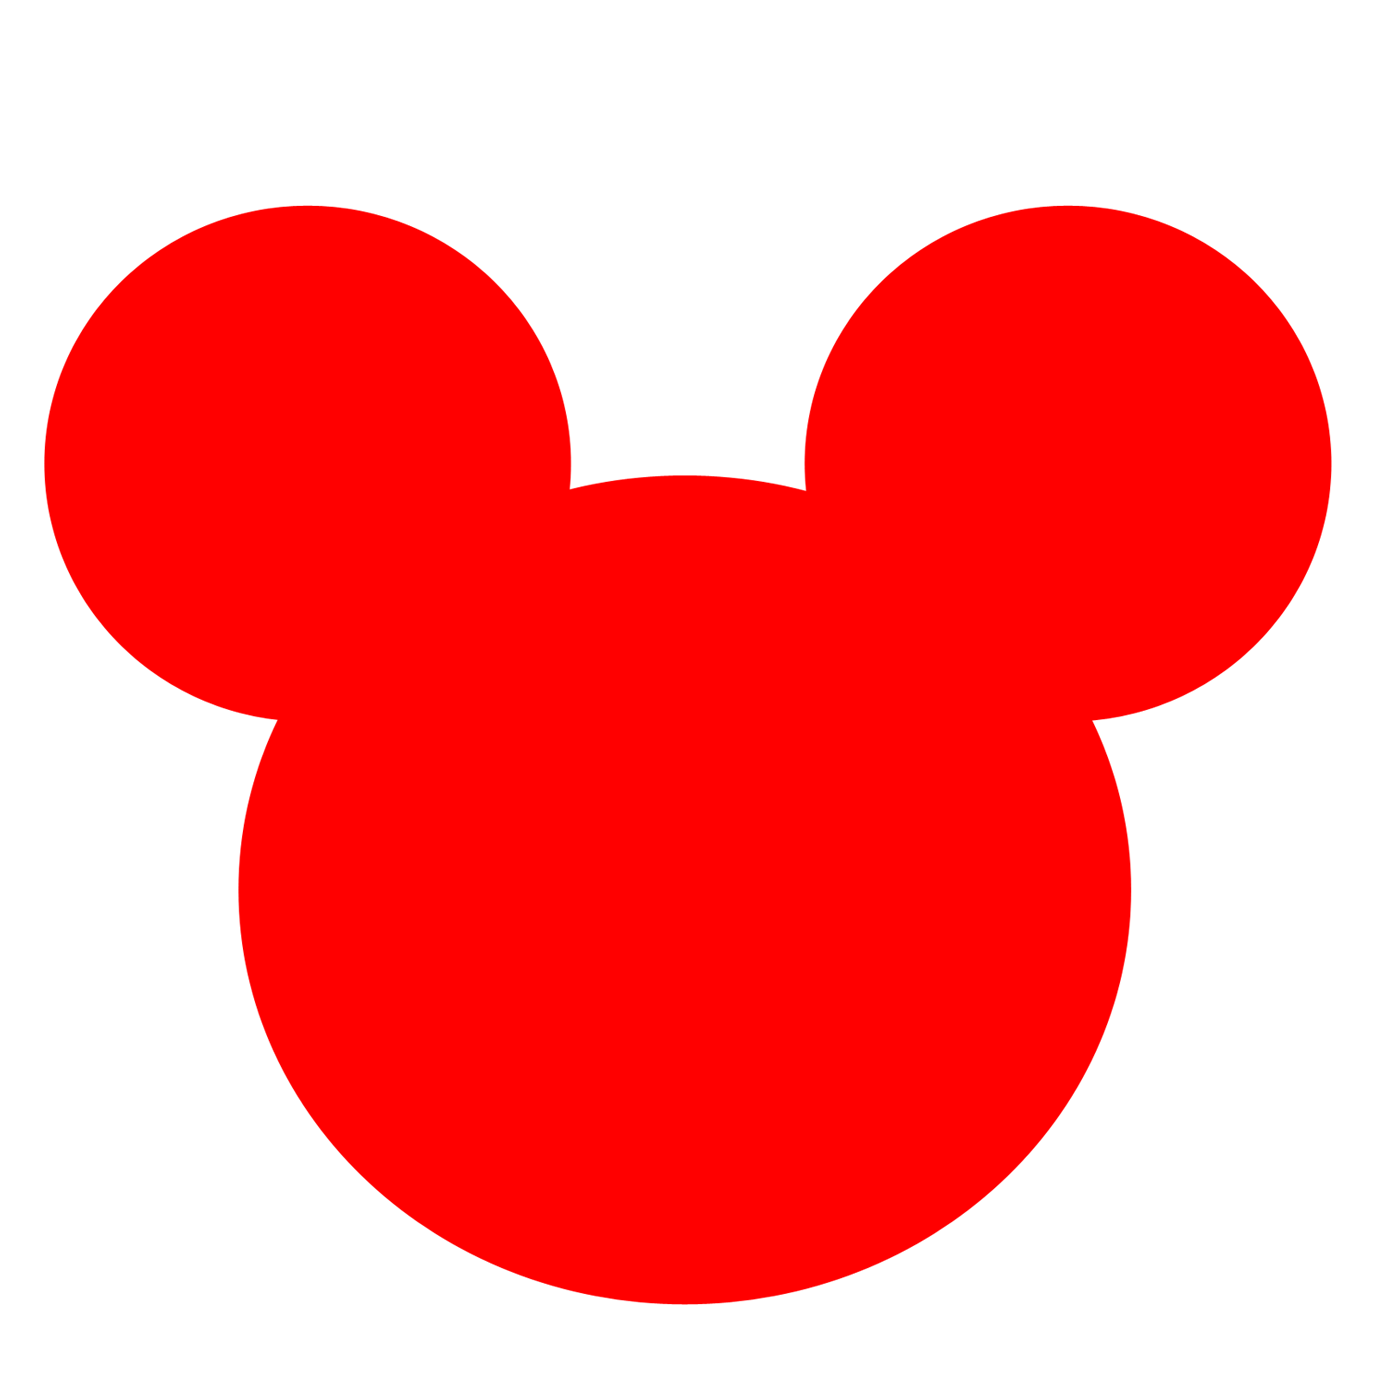 Mickey mouse birthday original mickey mouse sketches icon clipart